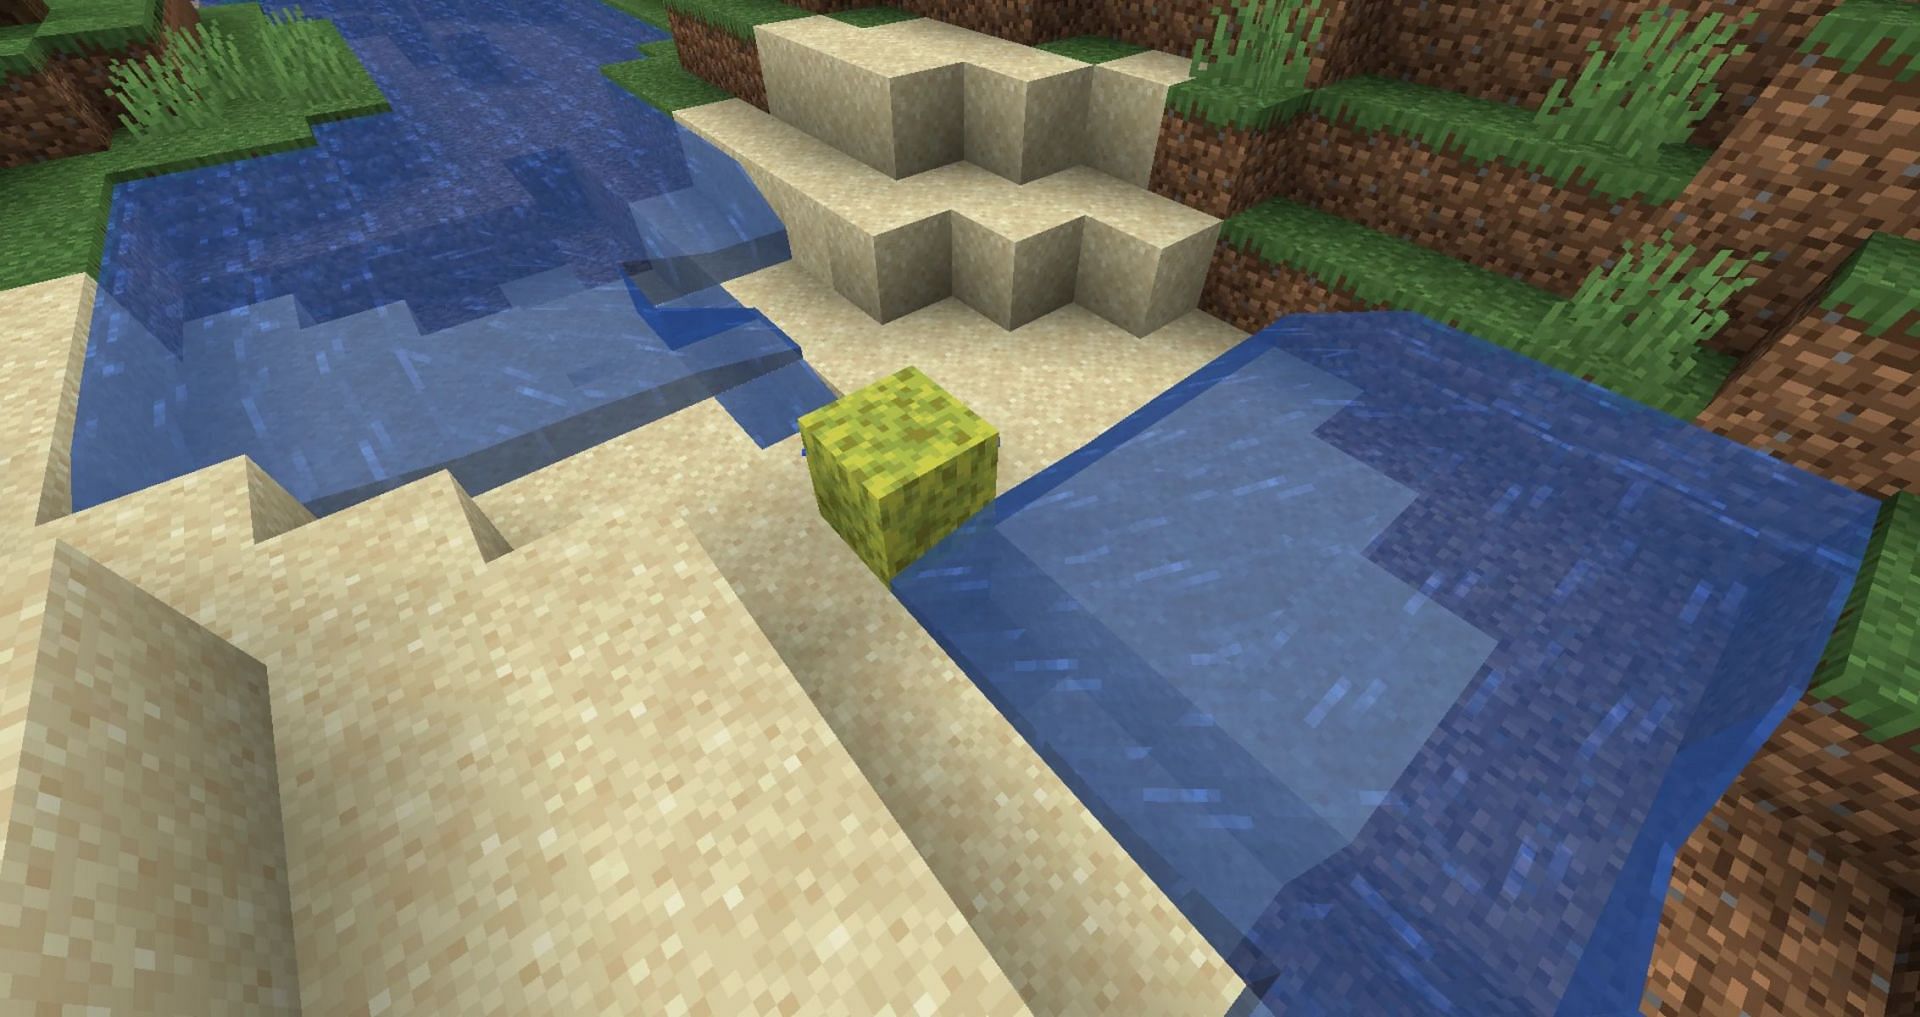 A sponge block cutting through and absorbing the midsection of a body of water (Image via Mojang)